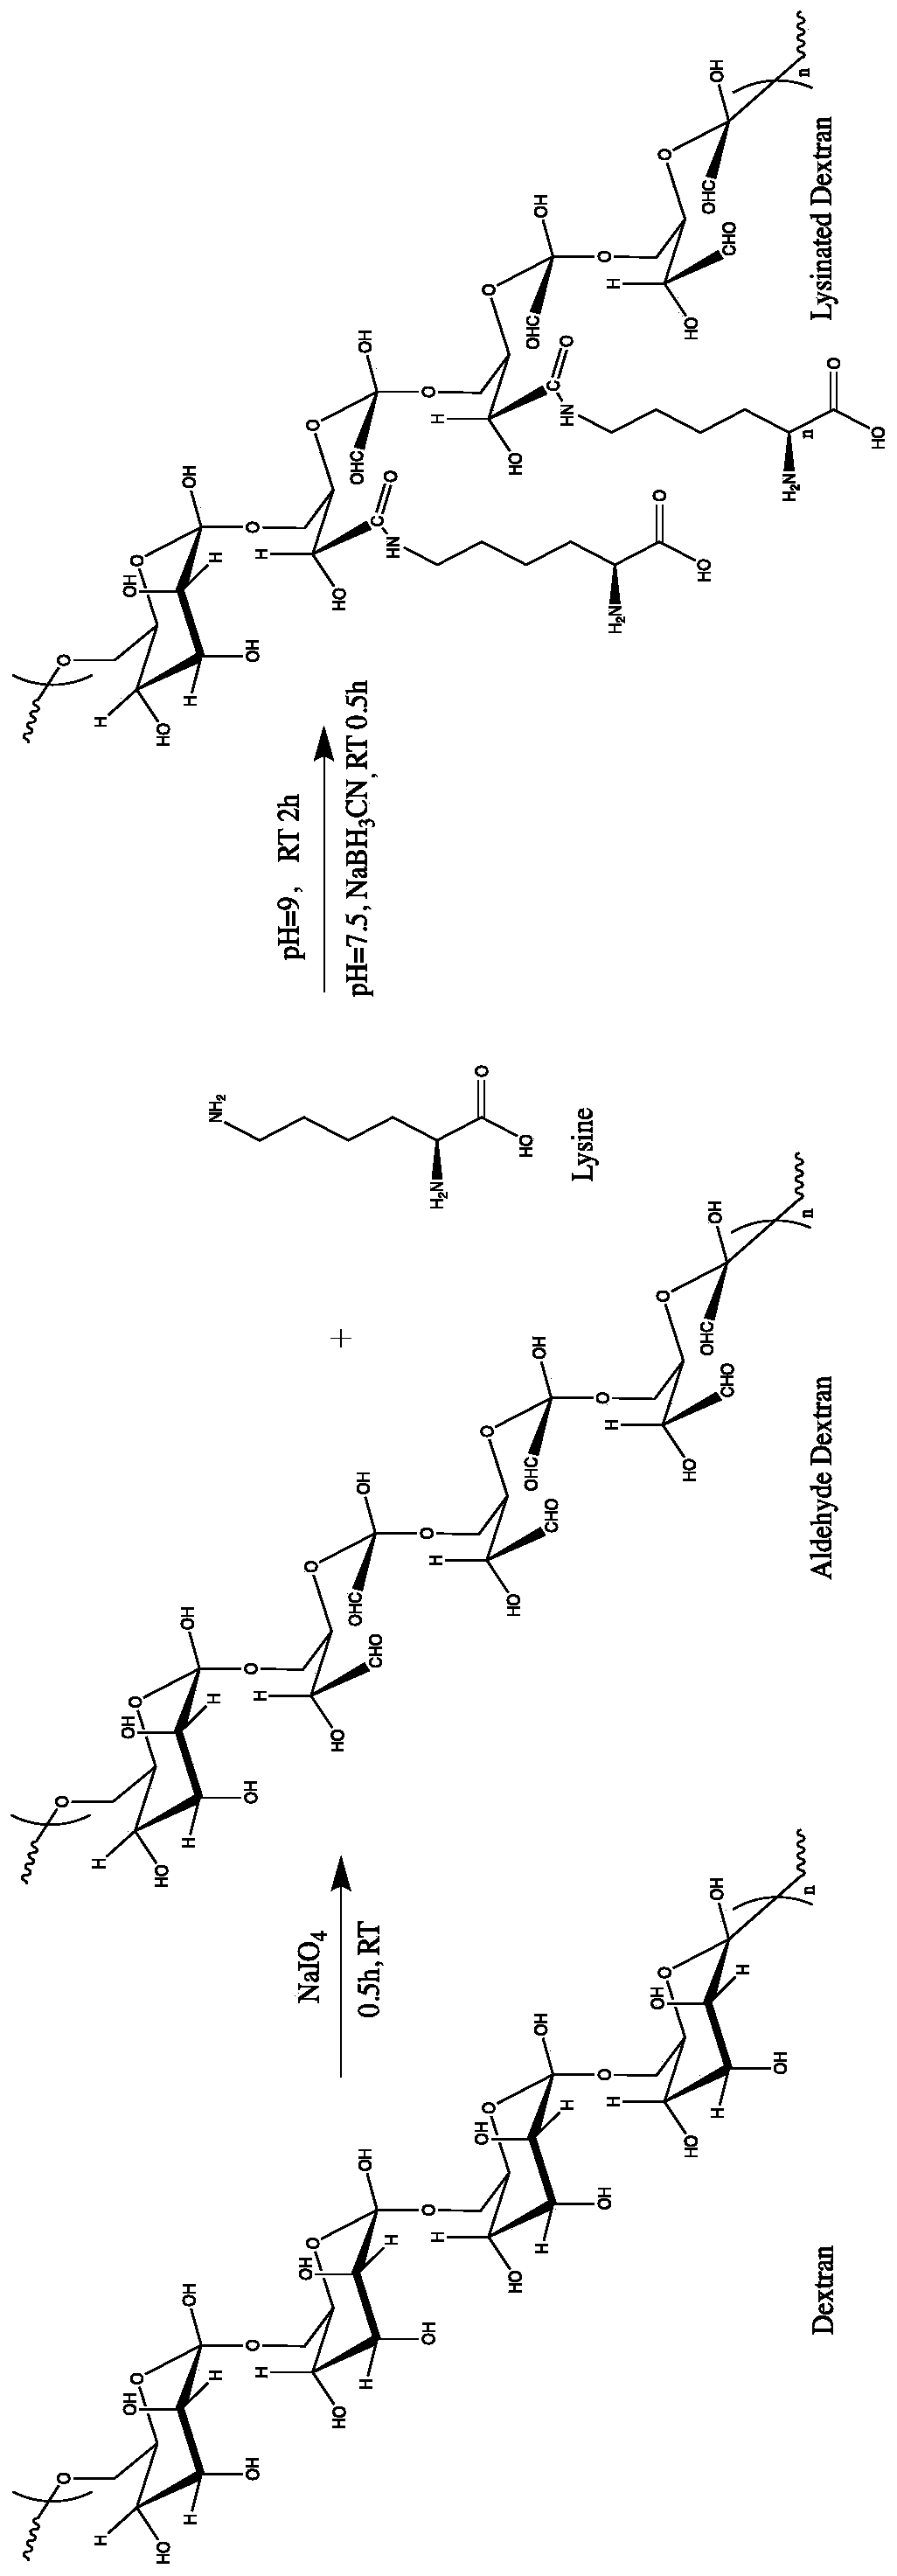 High-molecular polymer for stabilizing immobilized protein, and preparation method and application thereof